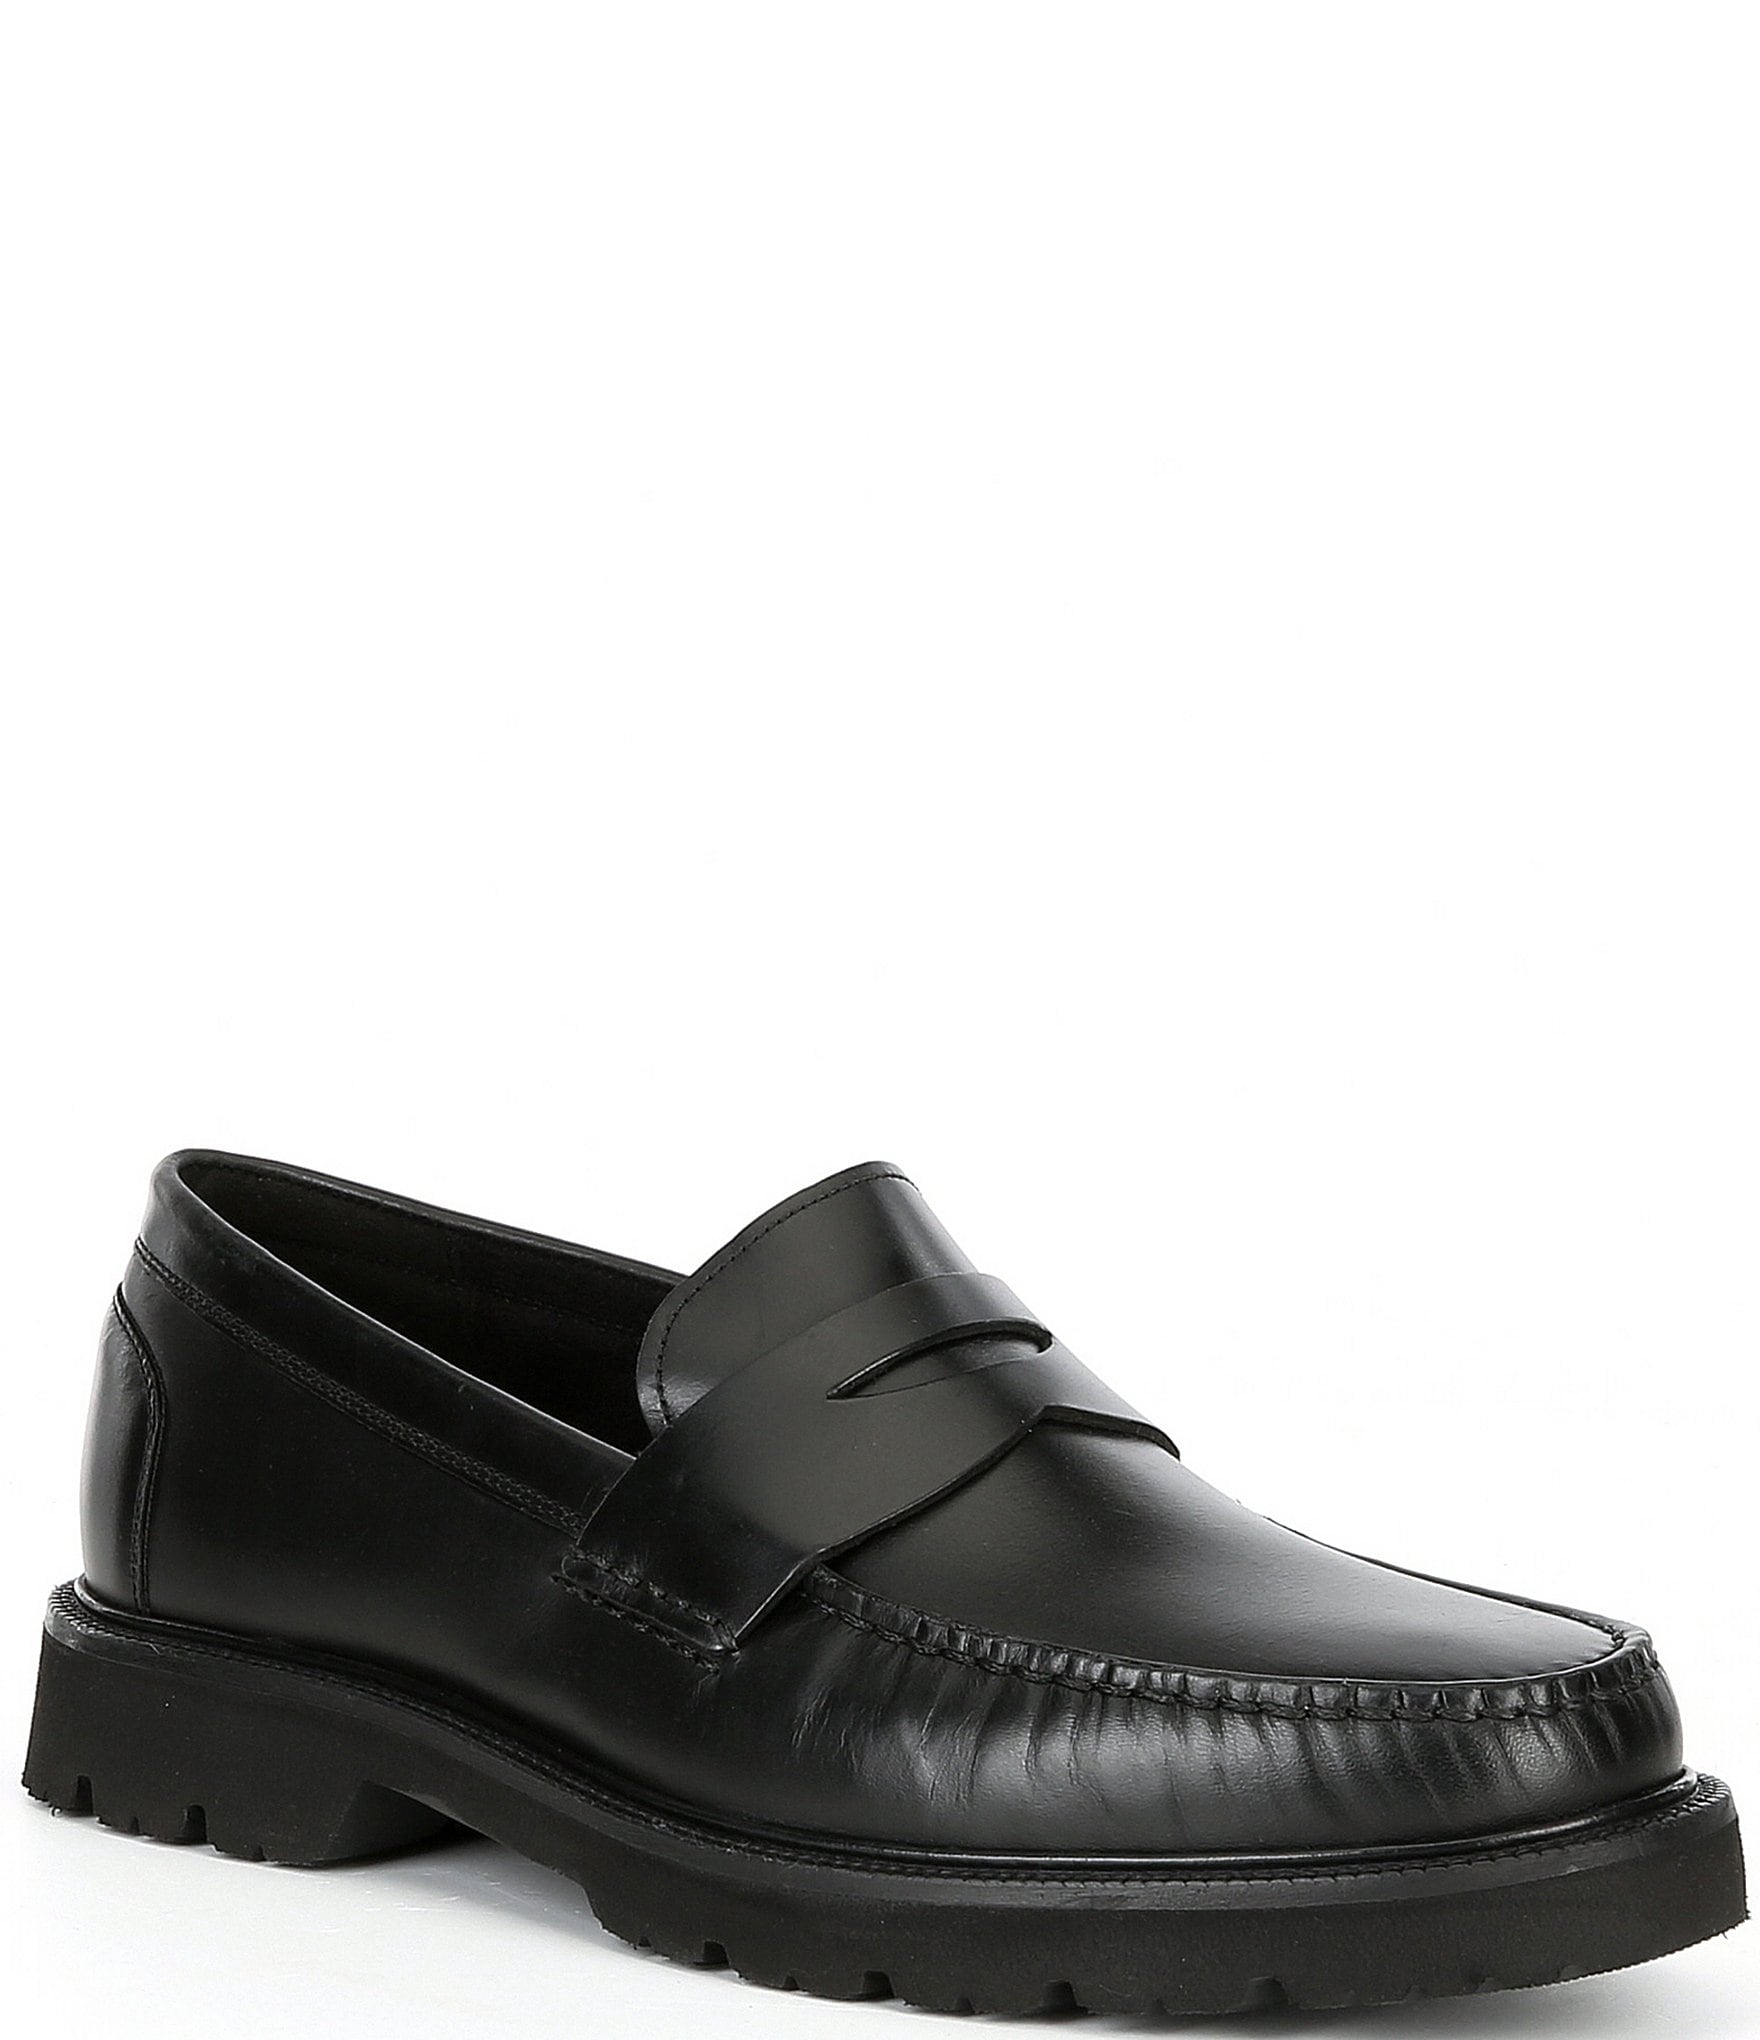 bad morgenmad Tag telefonen Cole Haan Men's American Classic Lug Sole Penny Loafers | Dillard's